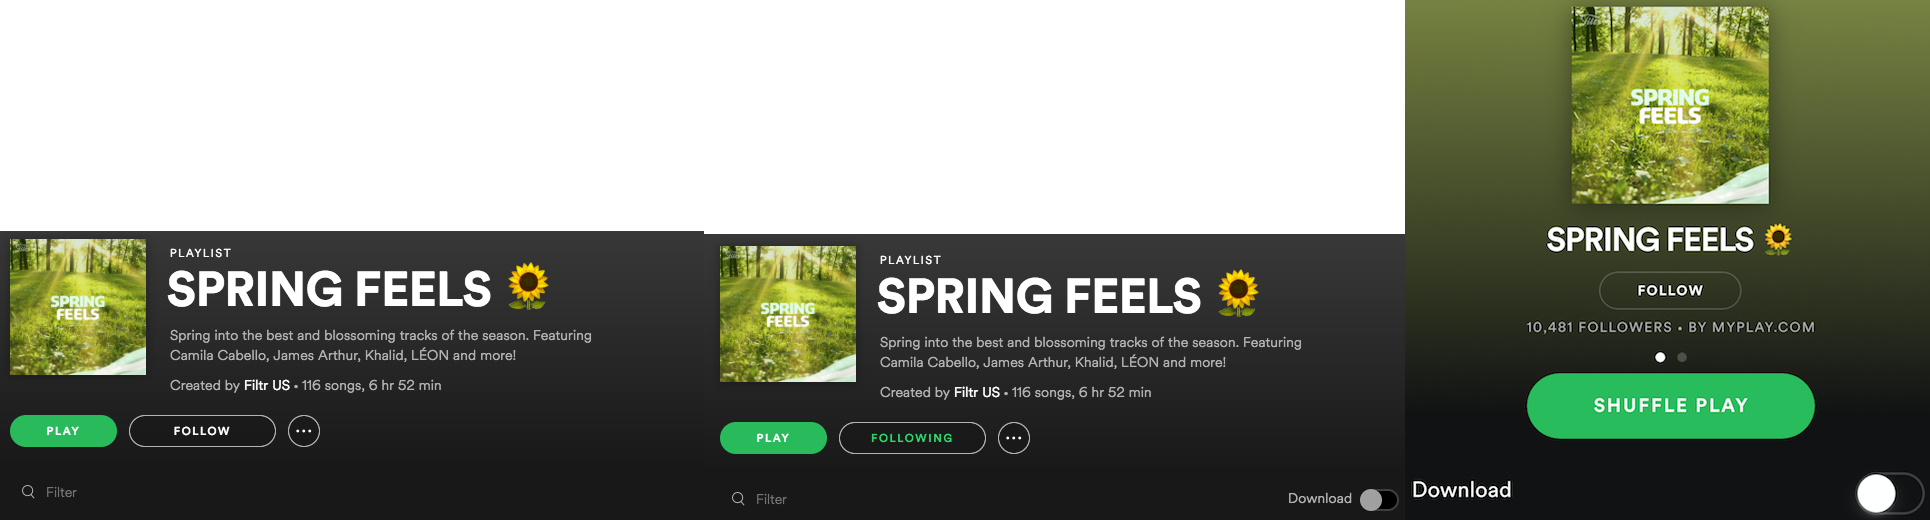 download mp3 of spotify playlist